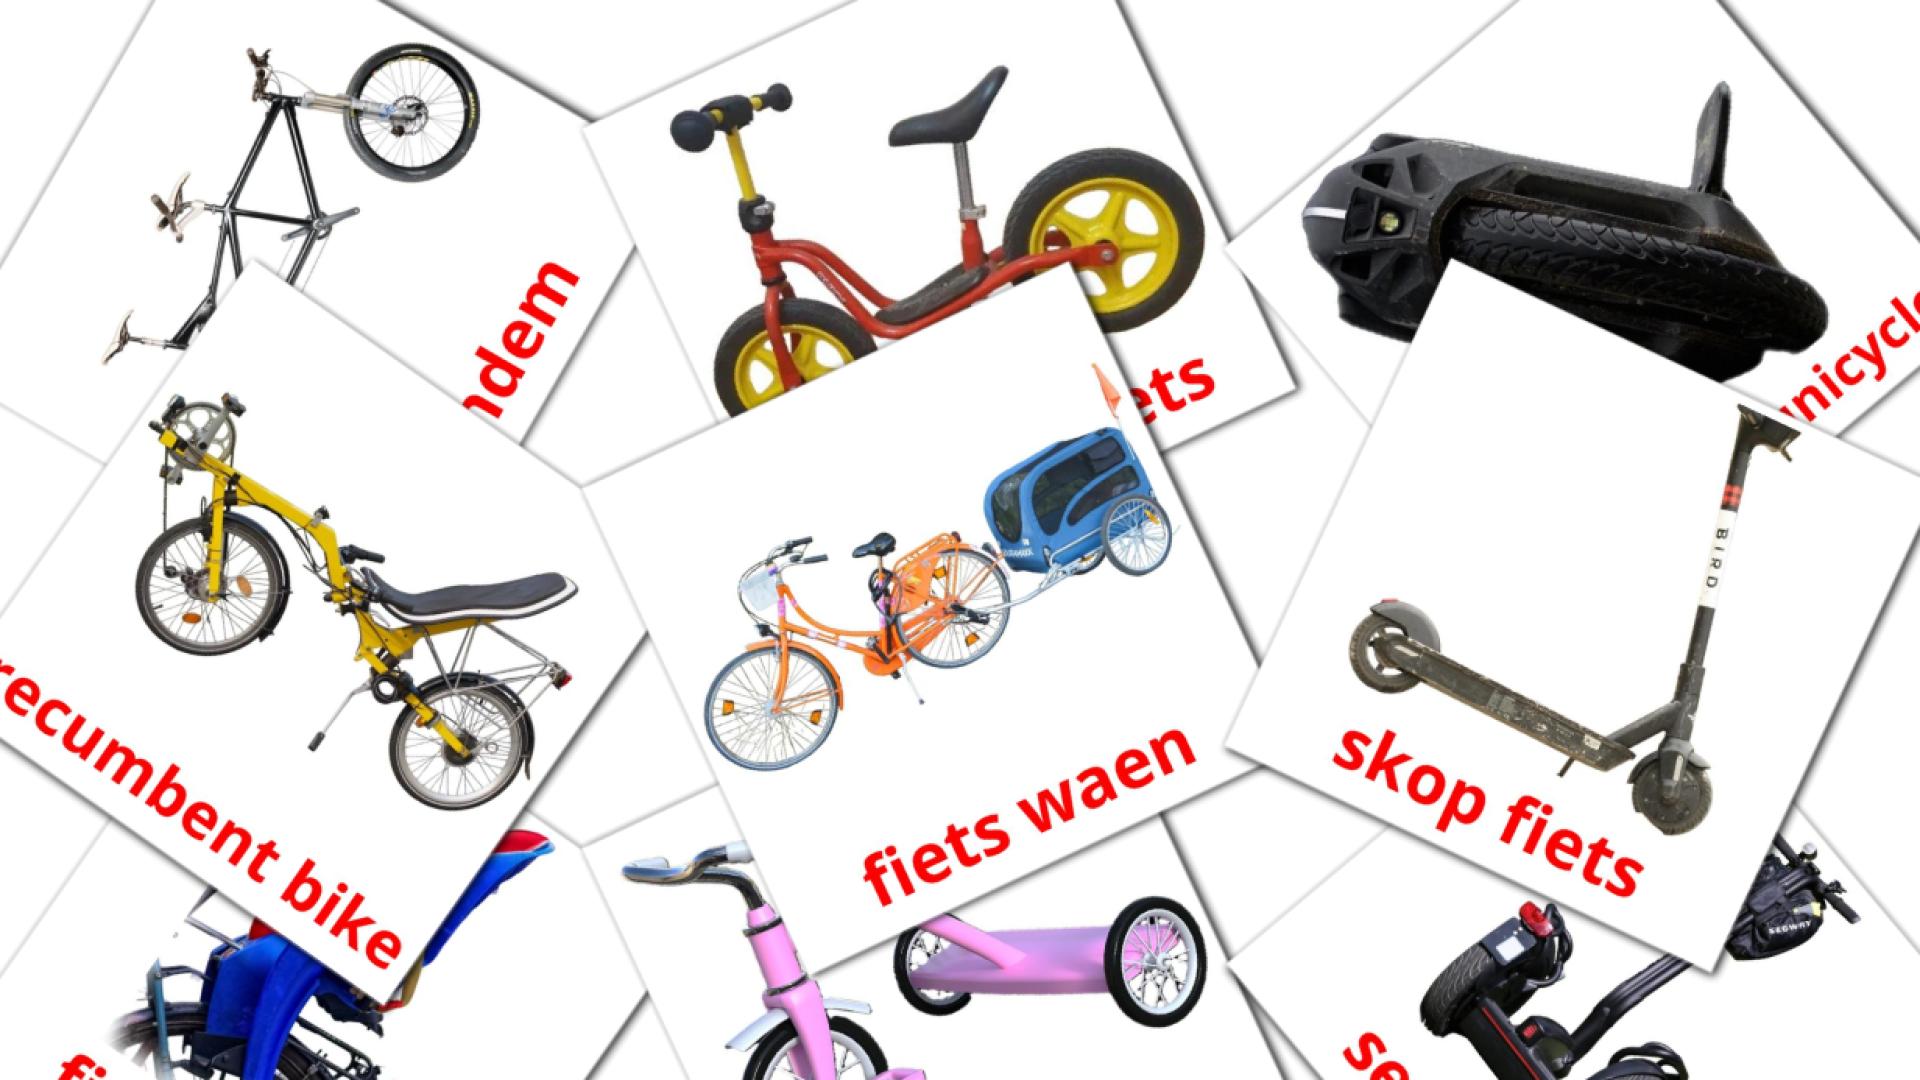 Bicycle transport - afrikaans vocabulary cards